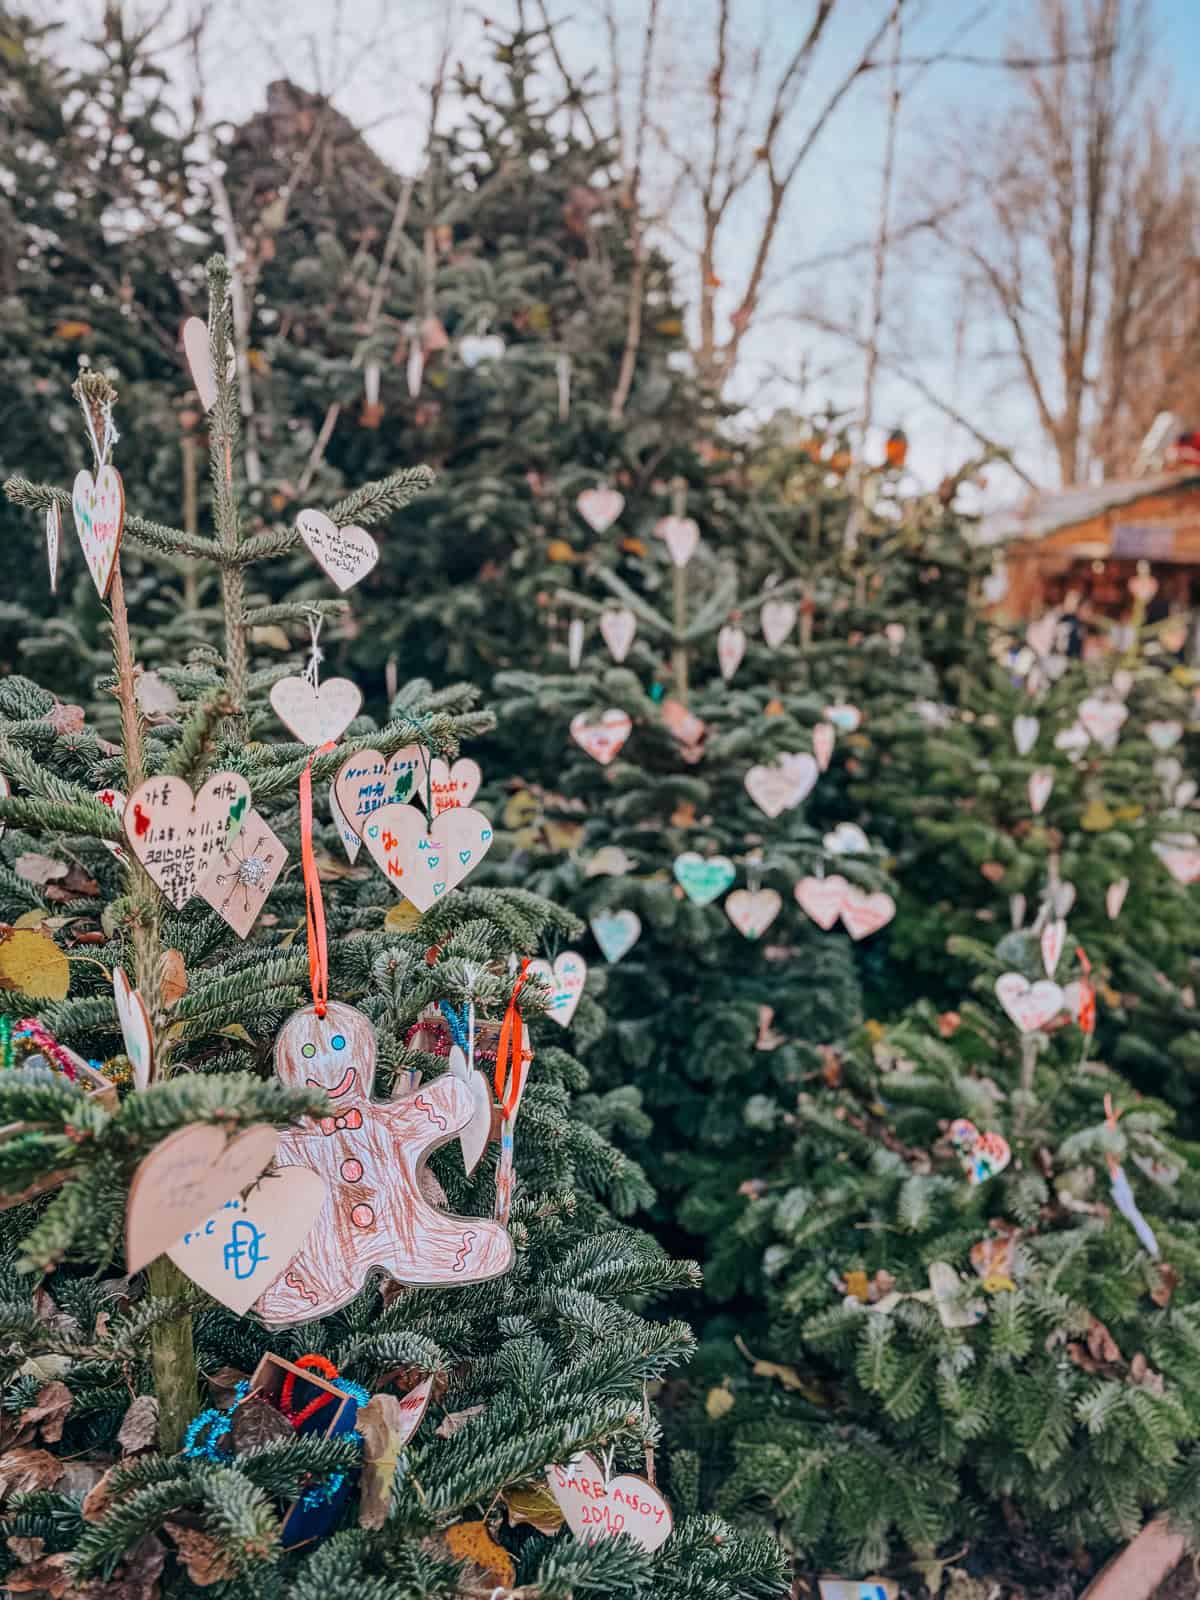 Multiple Christmas trees decorated with colorful heart-shaped ornaments and a gingerbread man, creating a festive and playful atmosphere.